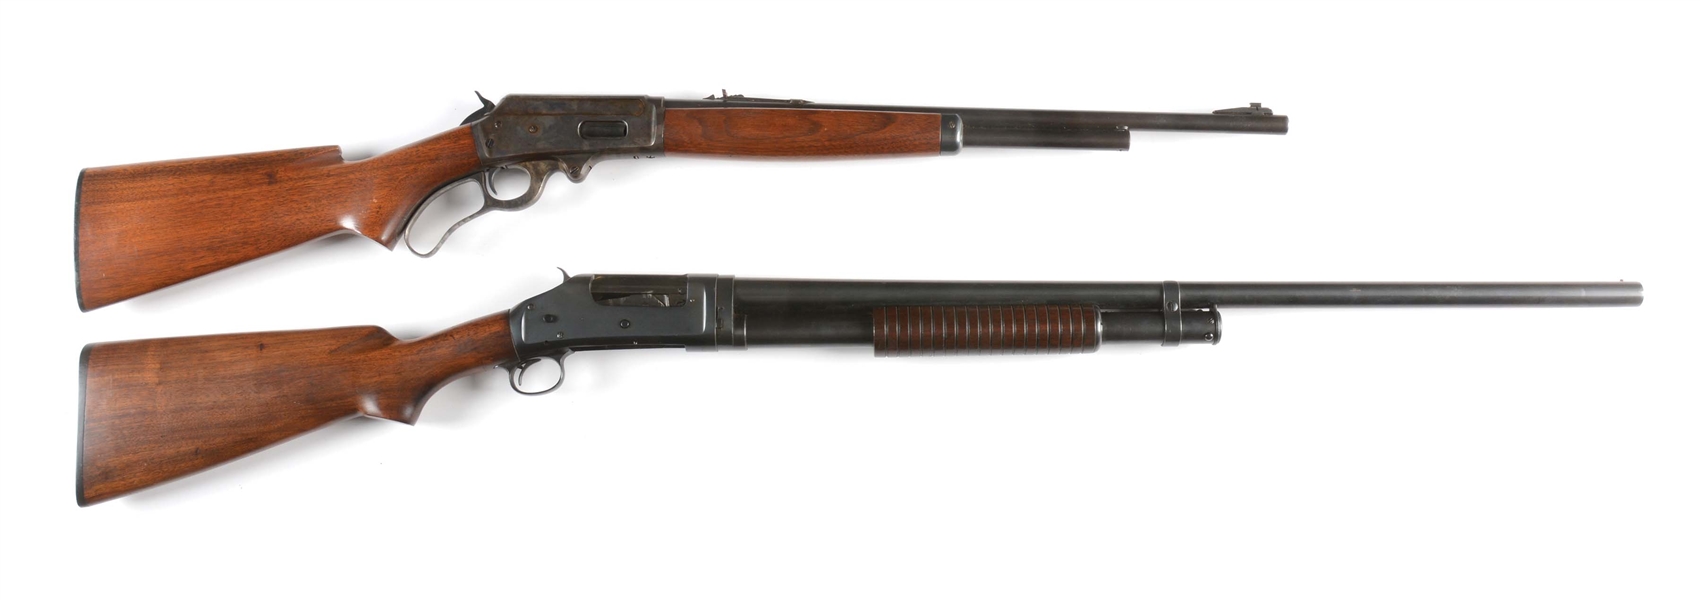 (C) LOT OF TWO: MARLIN MODEL 1936 RIFLE AND WINCHESTER MODEL 1897 SHOTGUN.